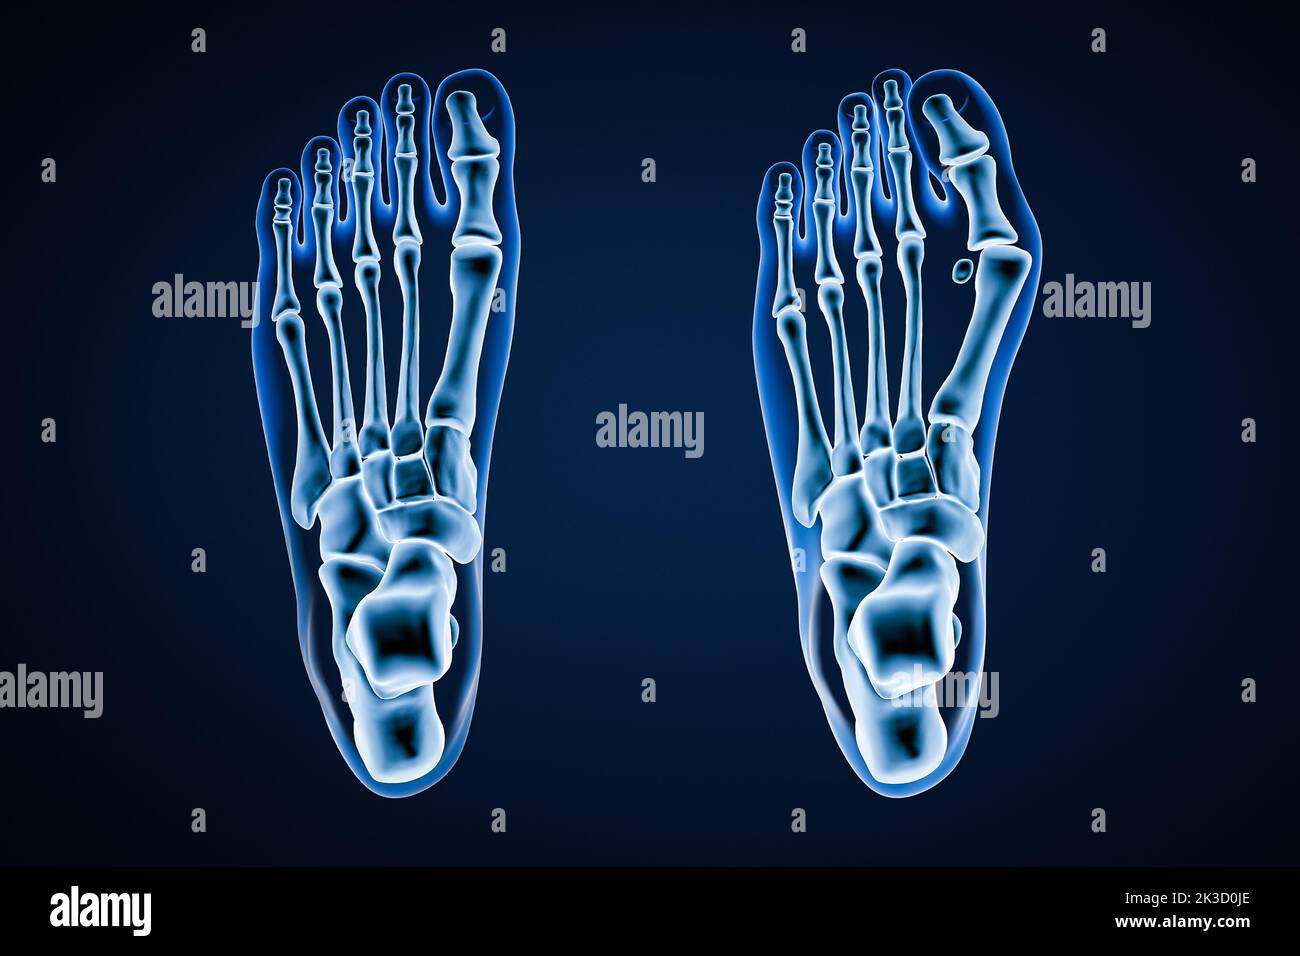 Hallux Valgus or bunion x-ray 3D rendering illustration. Dorsal or top view of human healthy and injured left foot on blue background. Anatomy, osteol Stock Photo